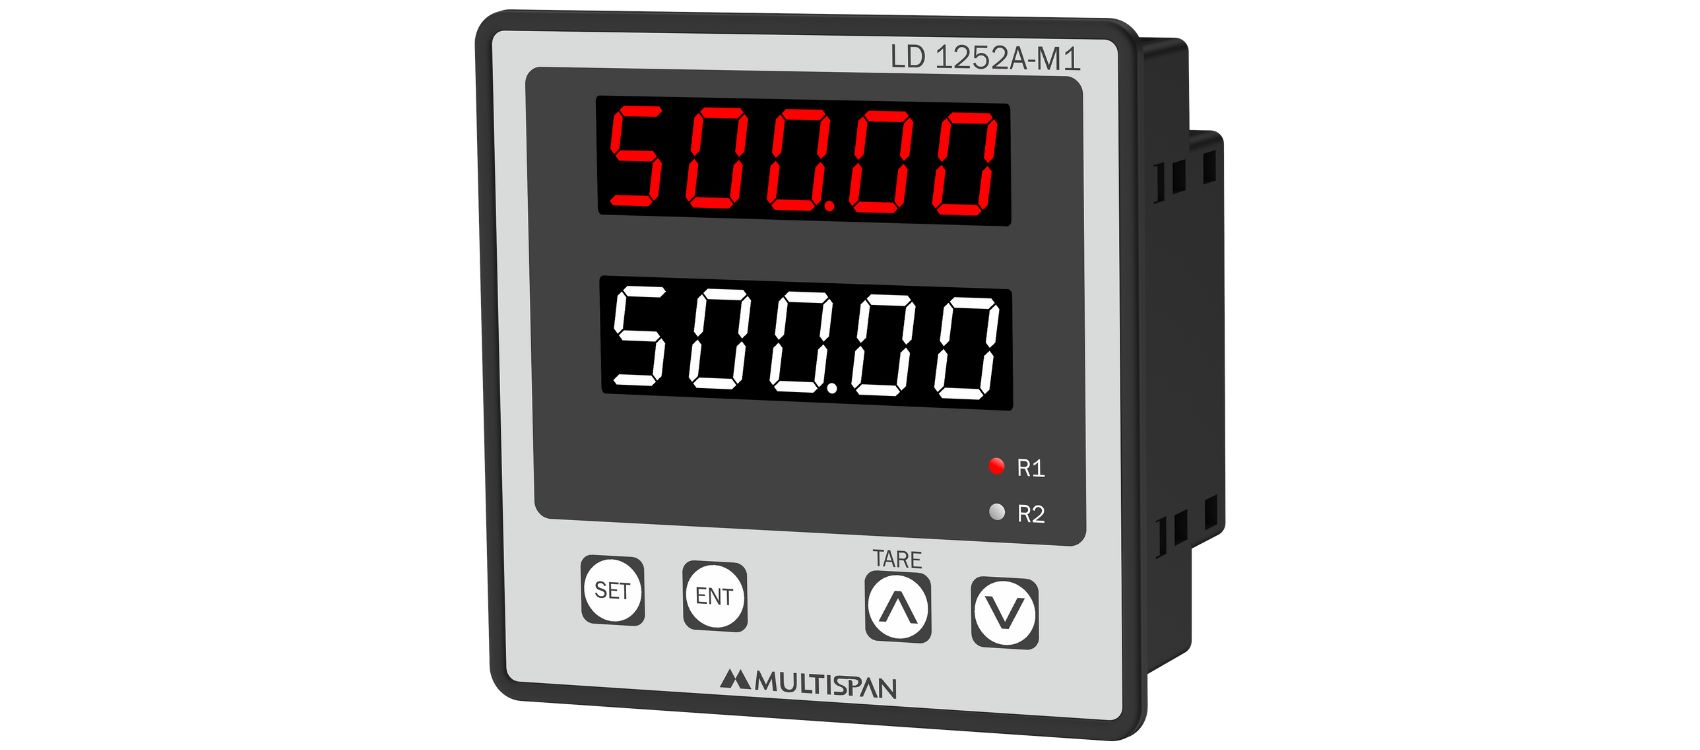 LD-1252A-M1 Load Cell Controller - product image